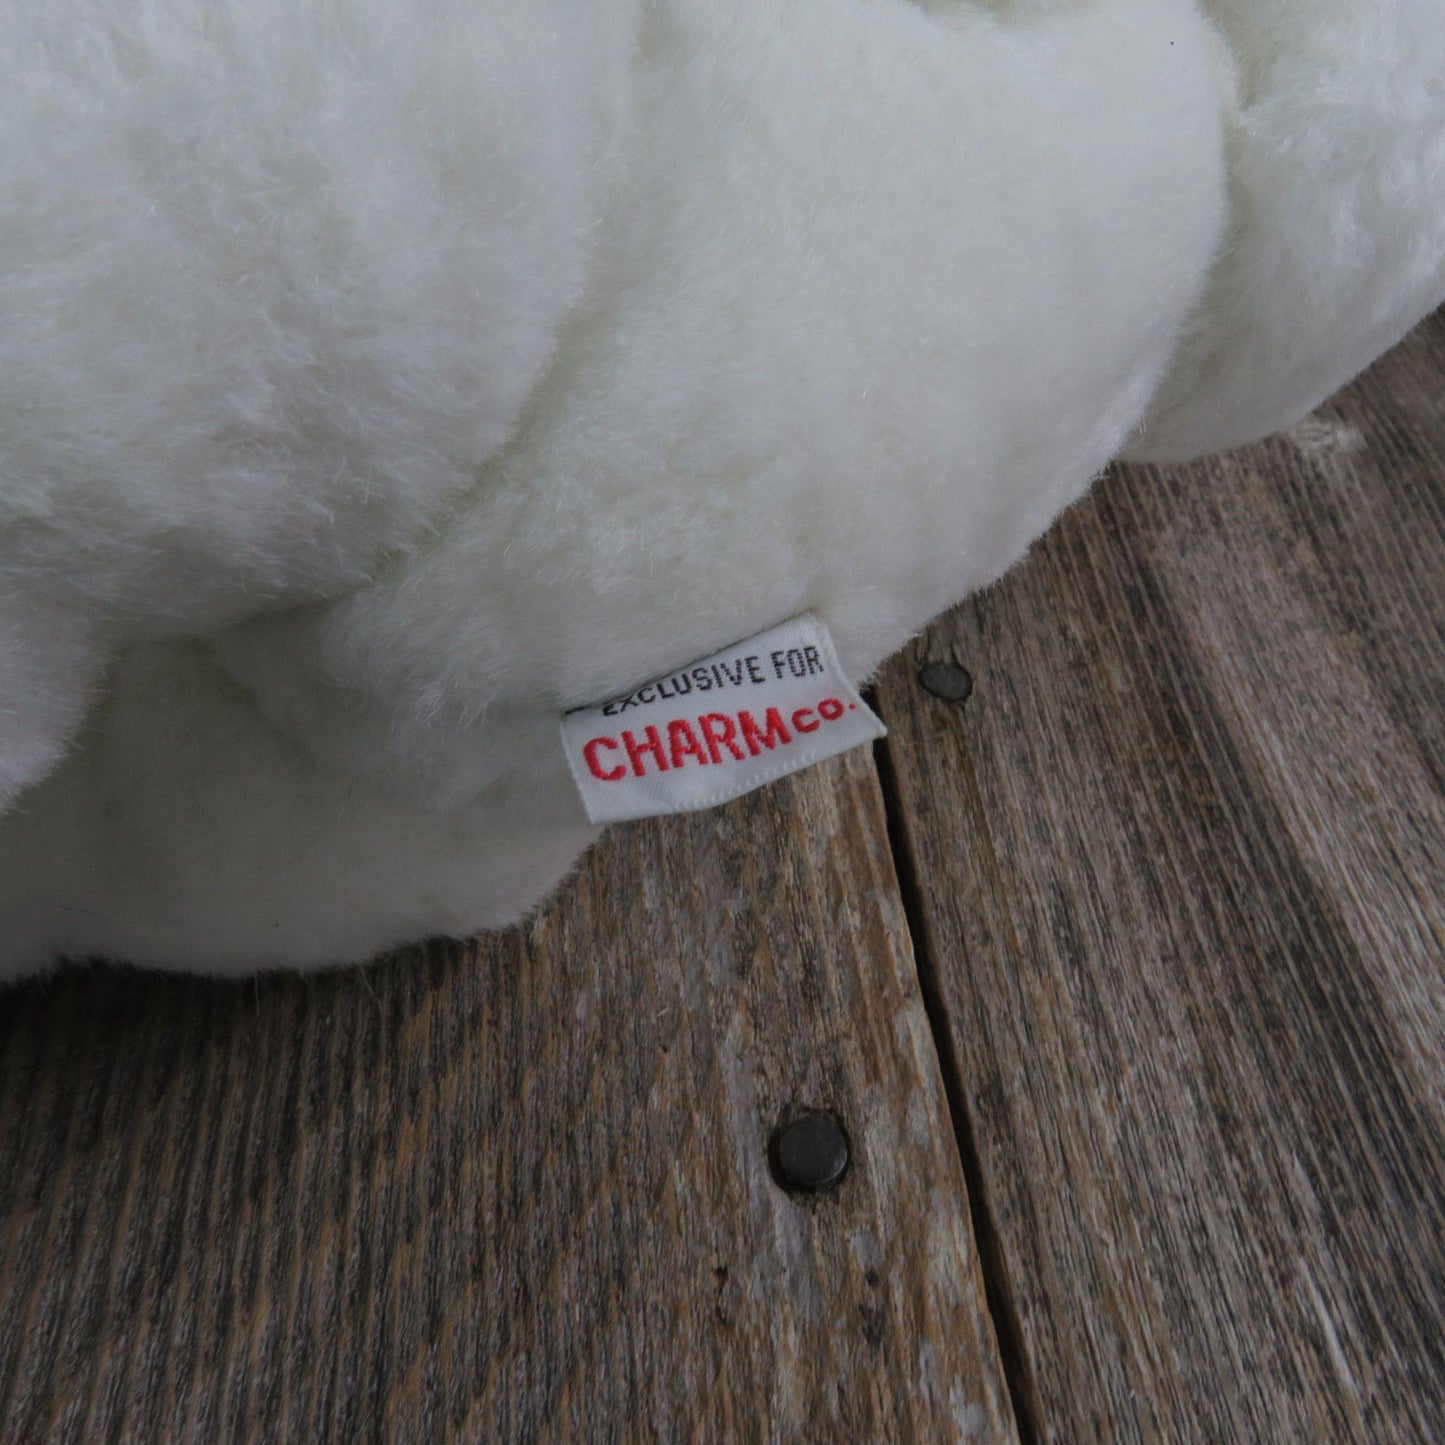 Vintage Teddy Bear Plush Charm Co Jointed White Flocked Nose Stuffed Animal Small 1982